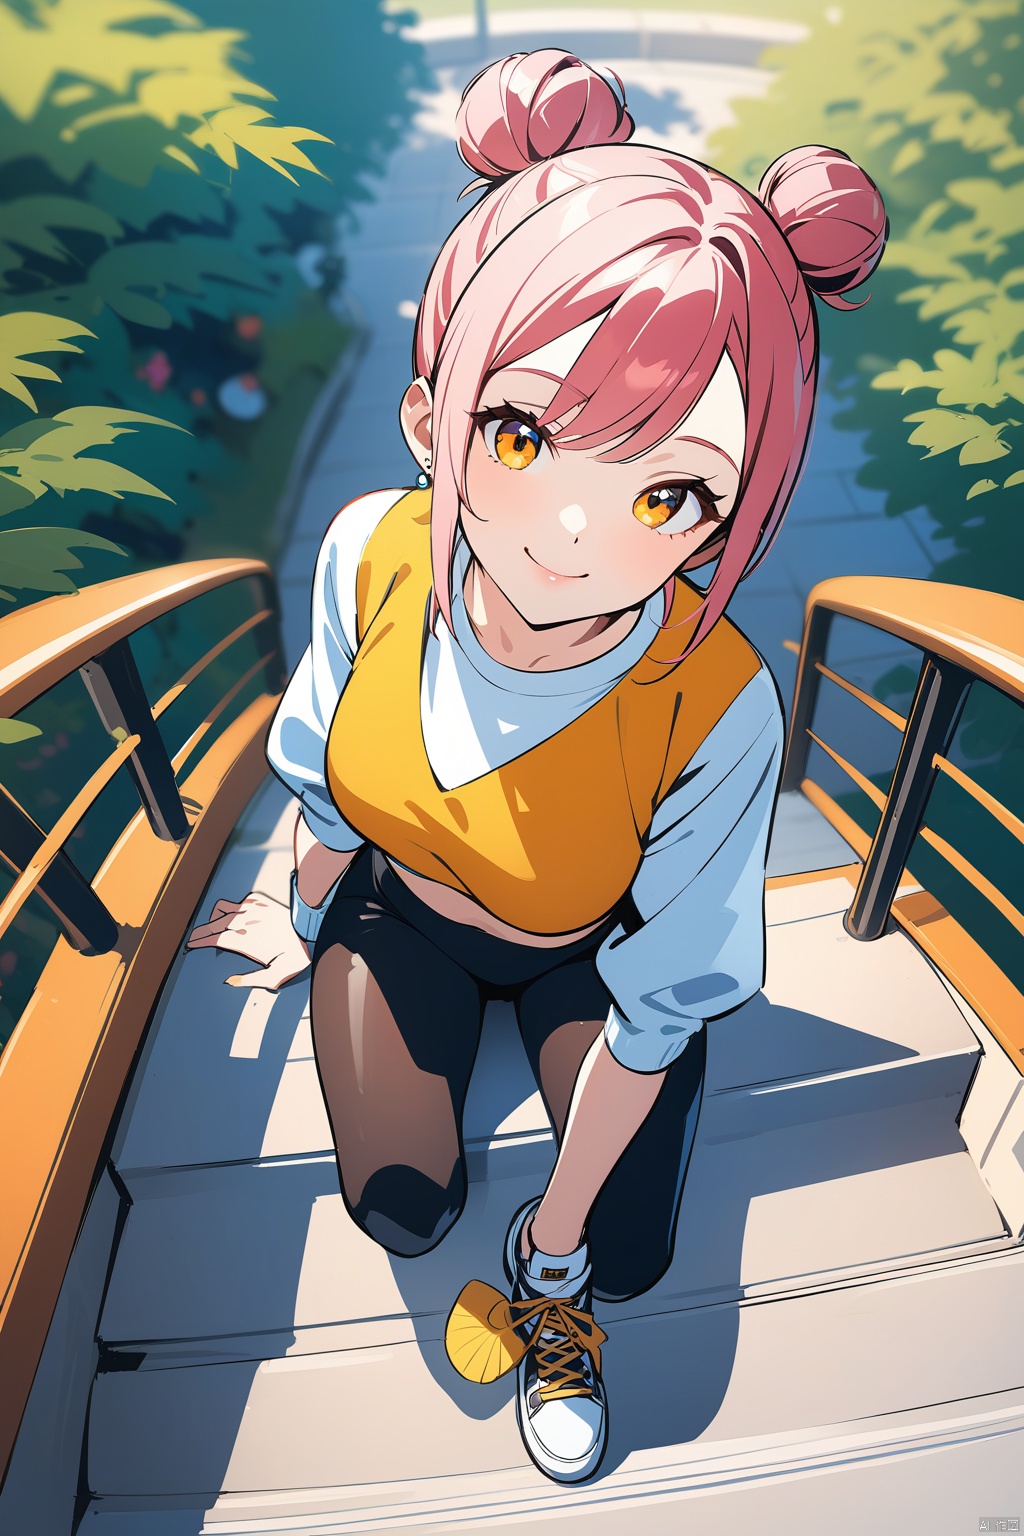  Bird&#39;s eye view, from above, fish eye view, perspective, stylish girl, smiling face, jacket, crop top, high waist leggings, designer sneakers, loose bun, jewelry, sitting on steps, focus on face, steps , railings, campus scenery, plants, architecture, bold colors, rich pictures, dynamic poses, perspective, dynamic,